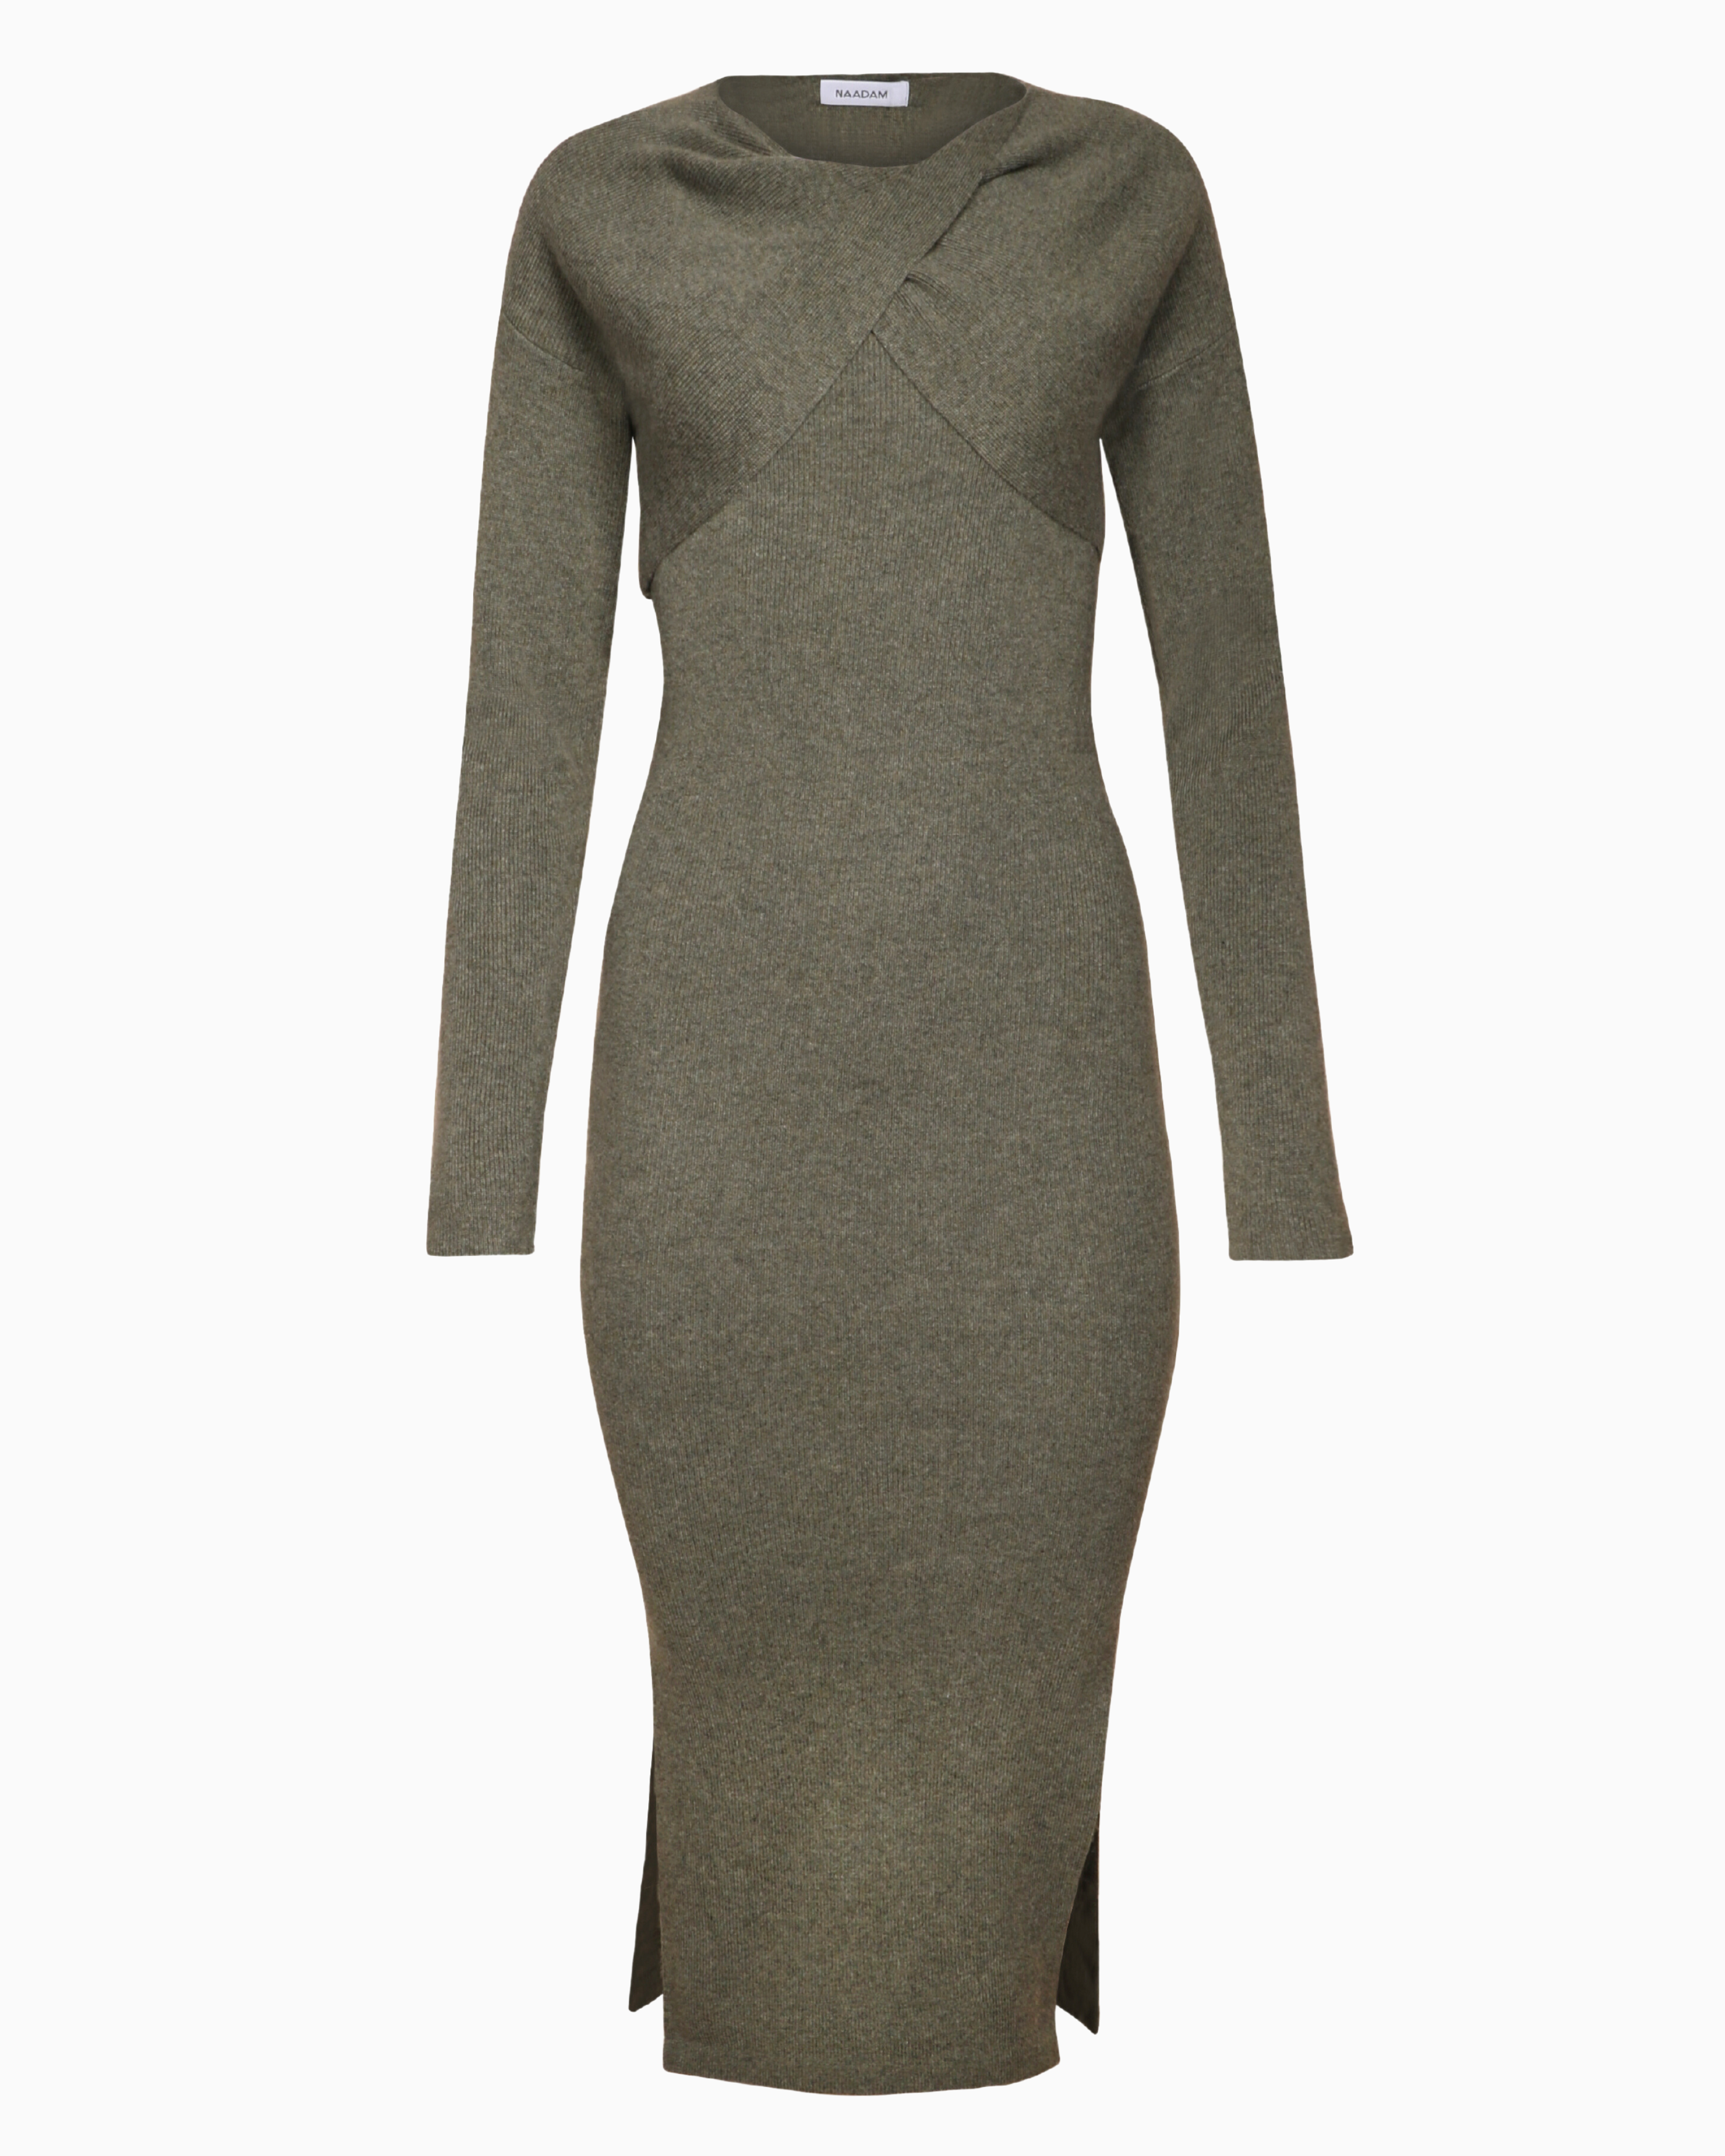 Naadam Two Piece Twist Front Dress in Faded Army Green